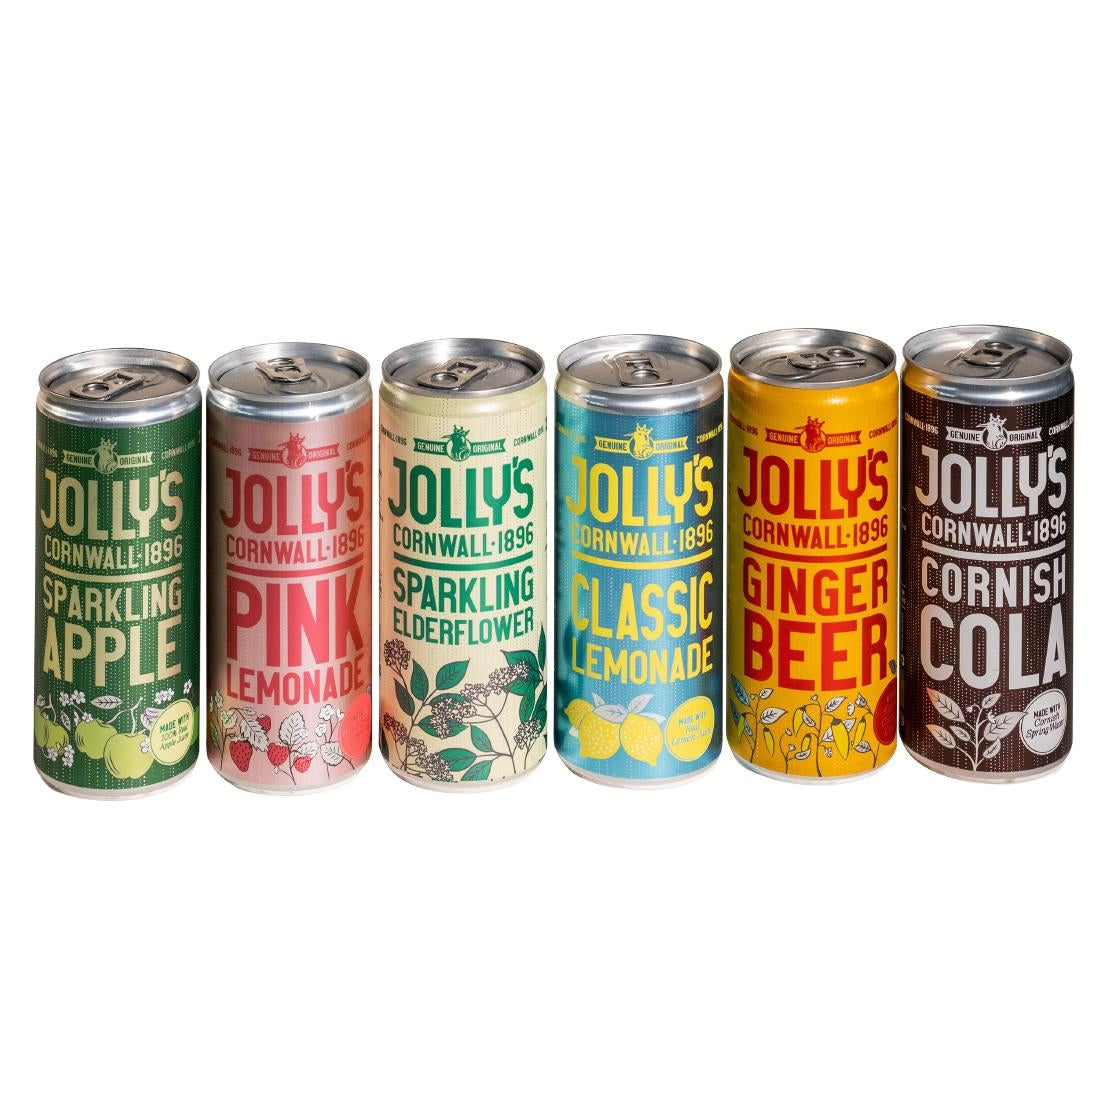 HN943 Jolly's Cornish Ginger Beer Cans 250ml (Pack of 24)